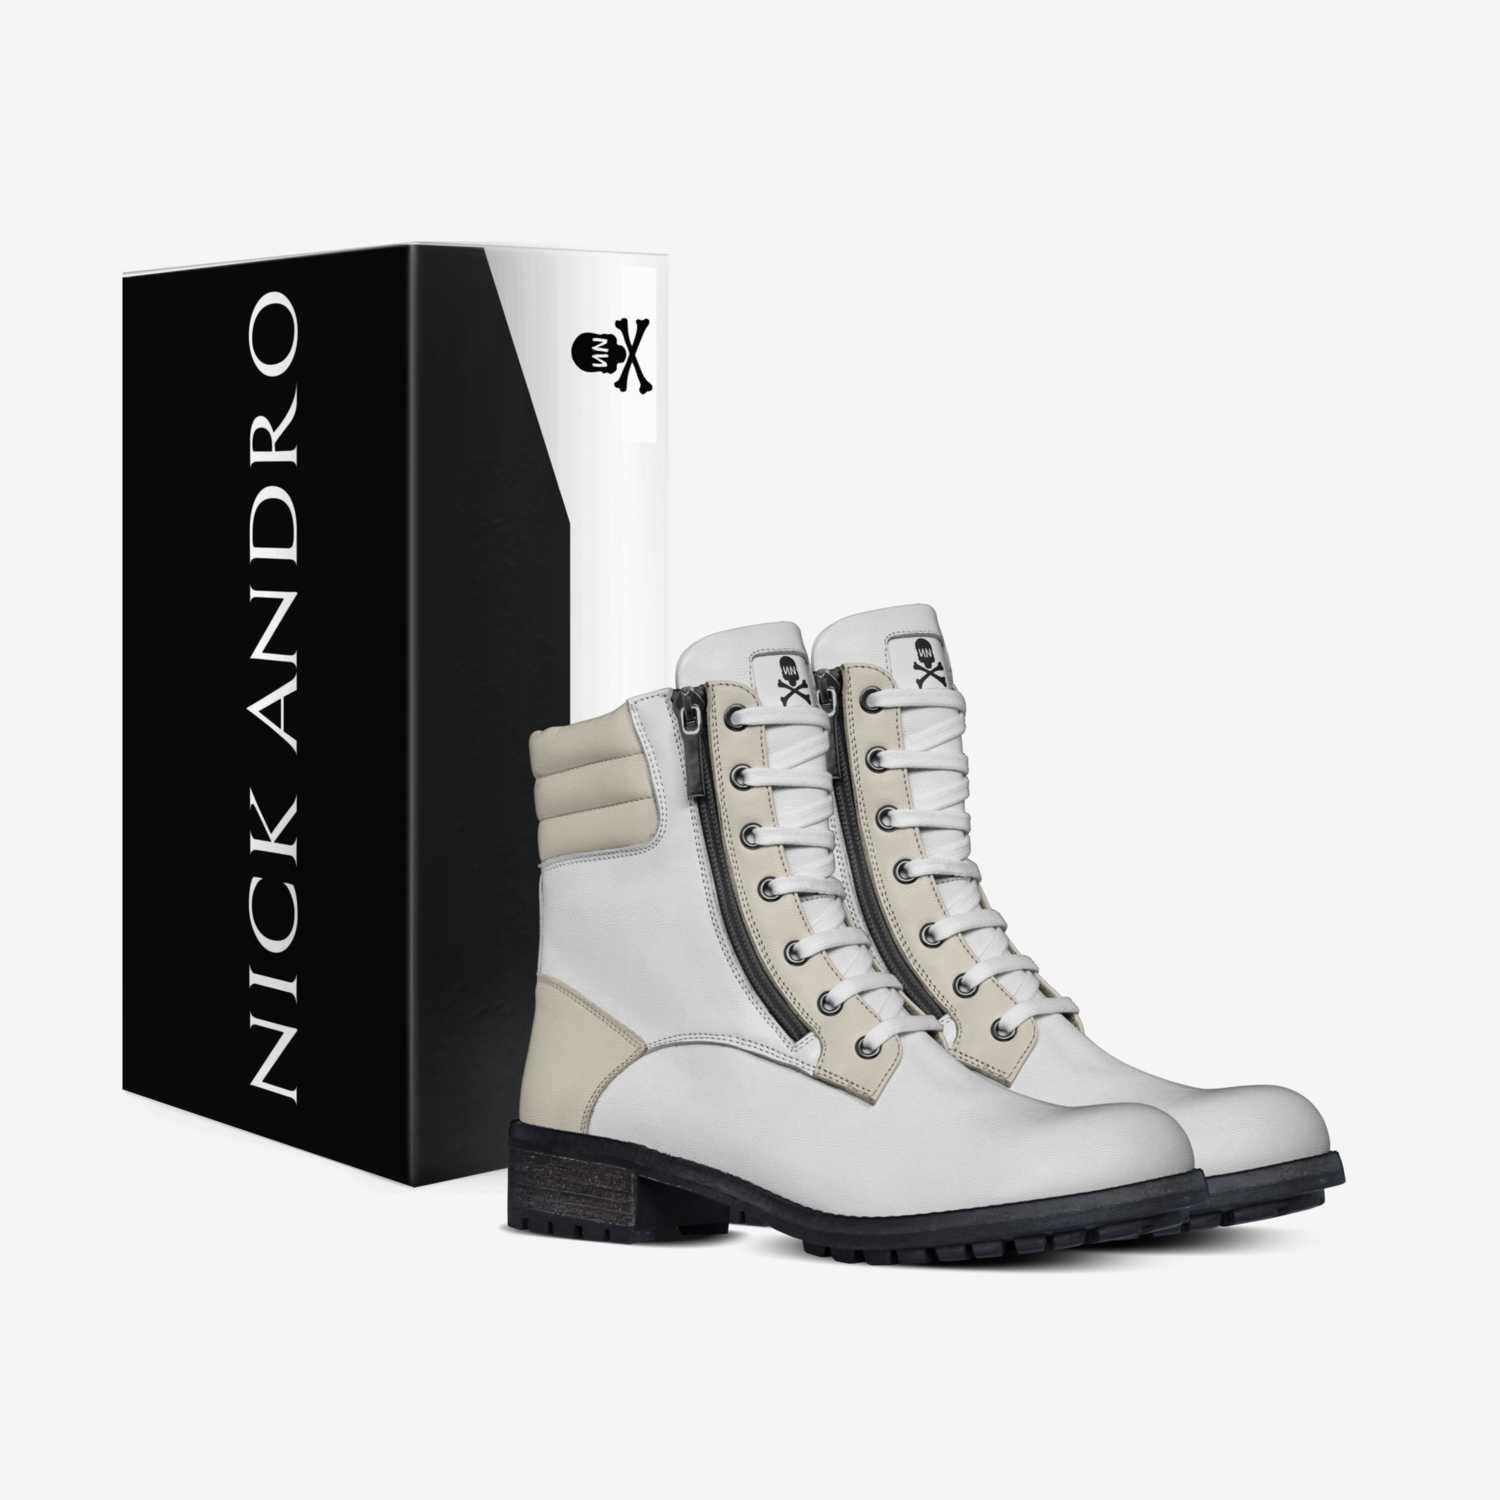 NICK ANDRO custom made in Italy shoes by Jesus Nicandro | Box view